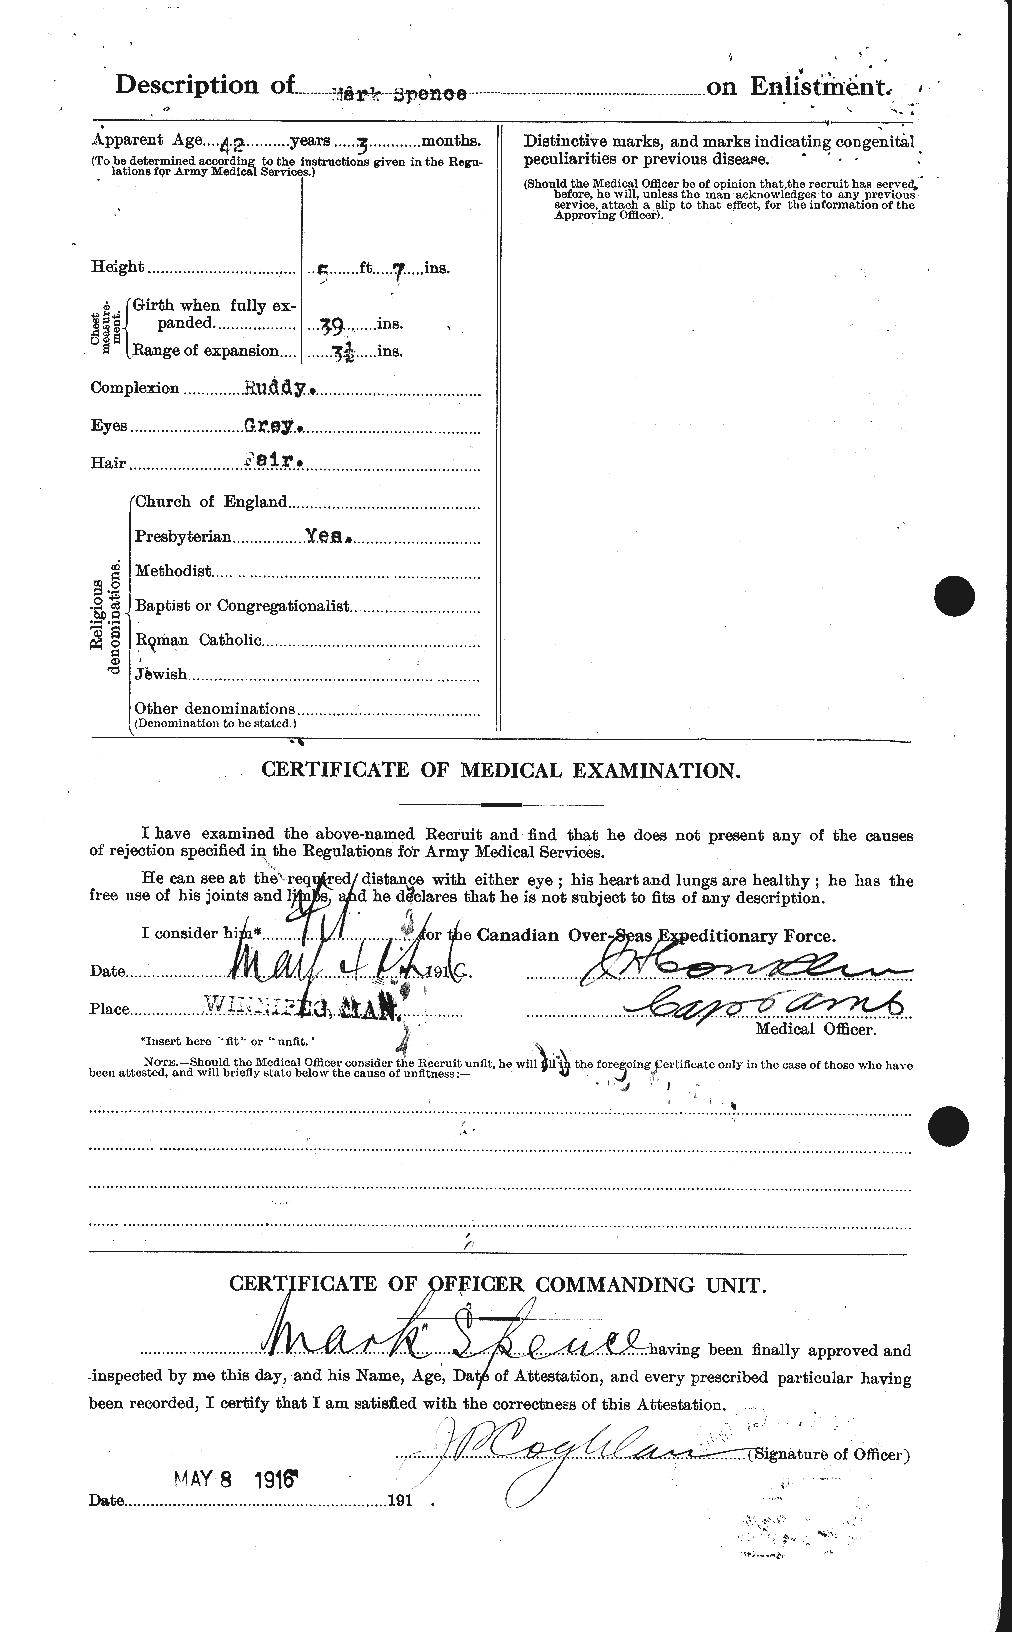 Personnel Records of the First World War - CEF 621394b